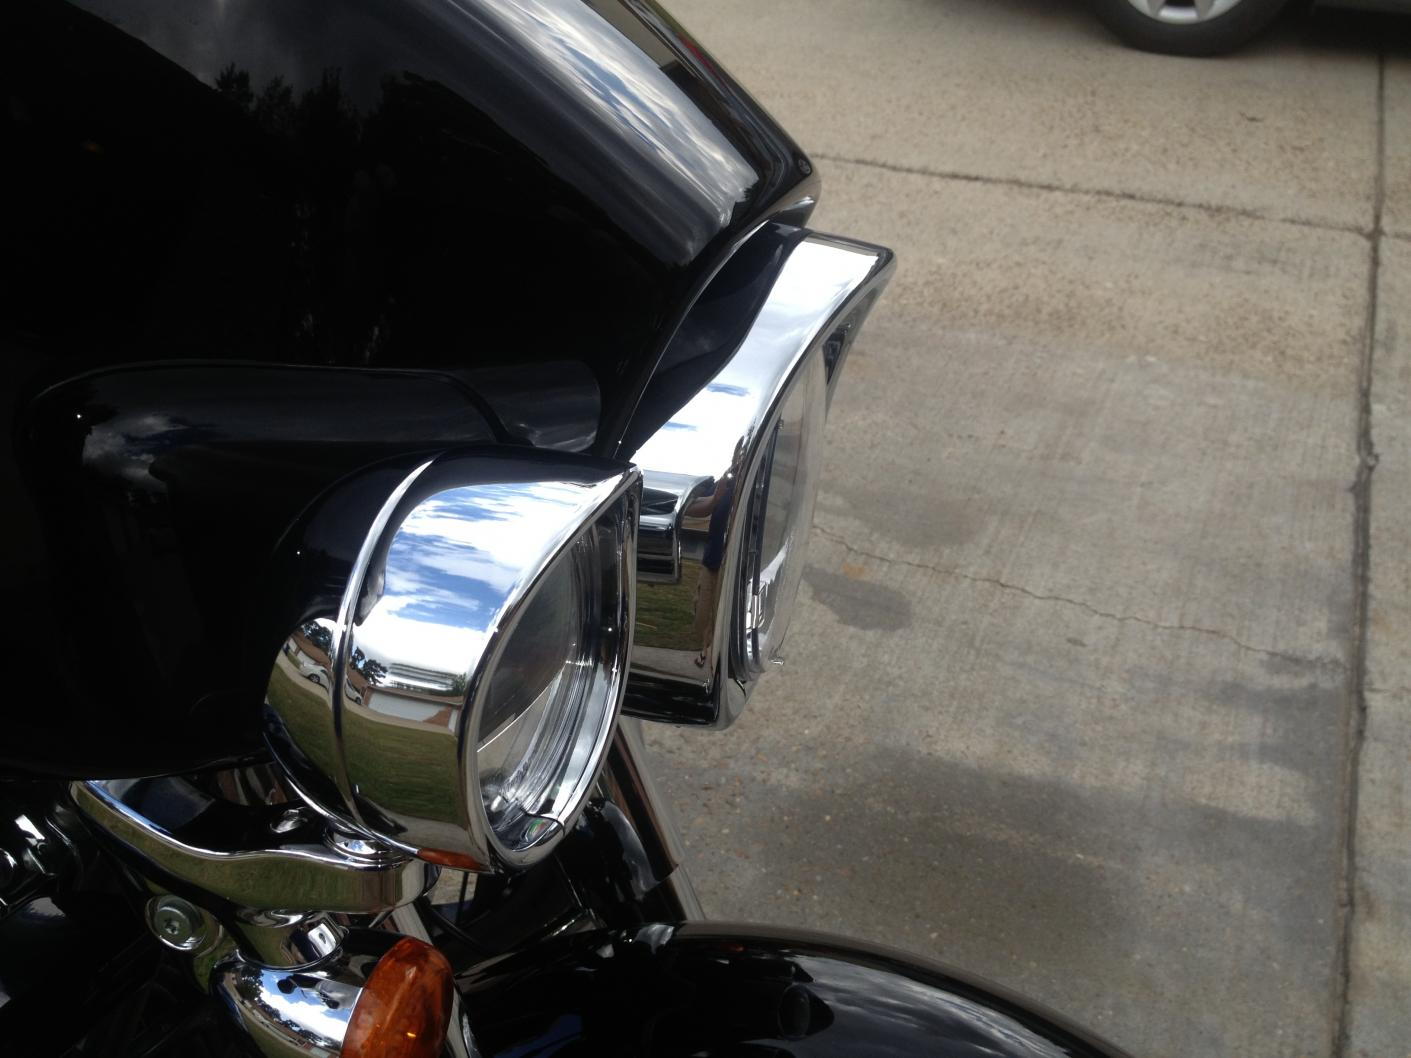 Check all the trim including the windshield and headlight rings